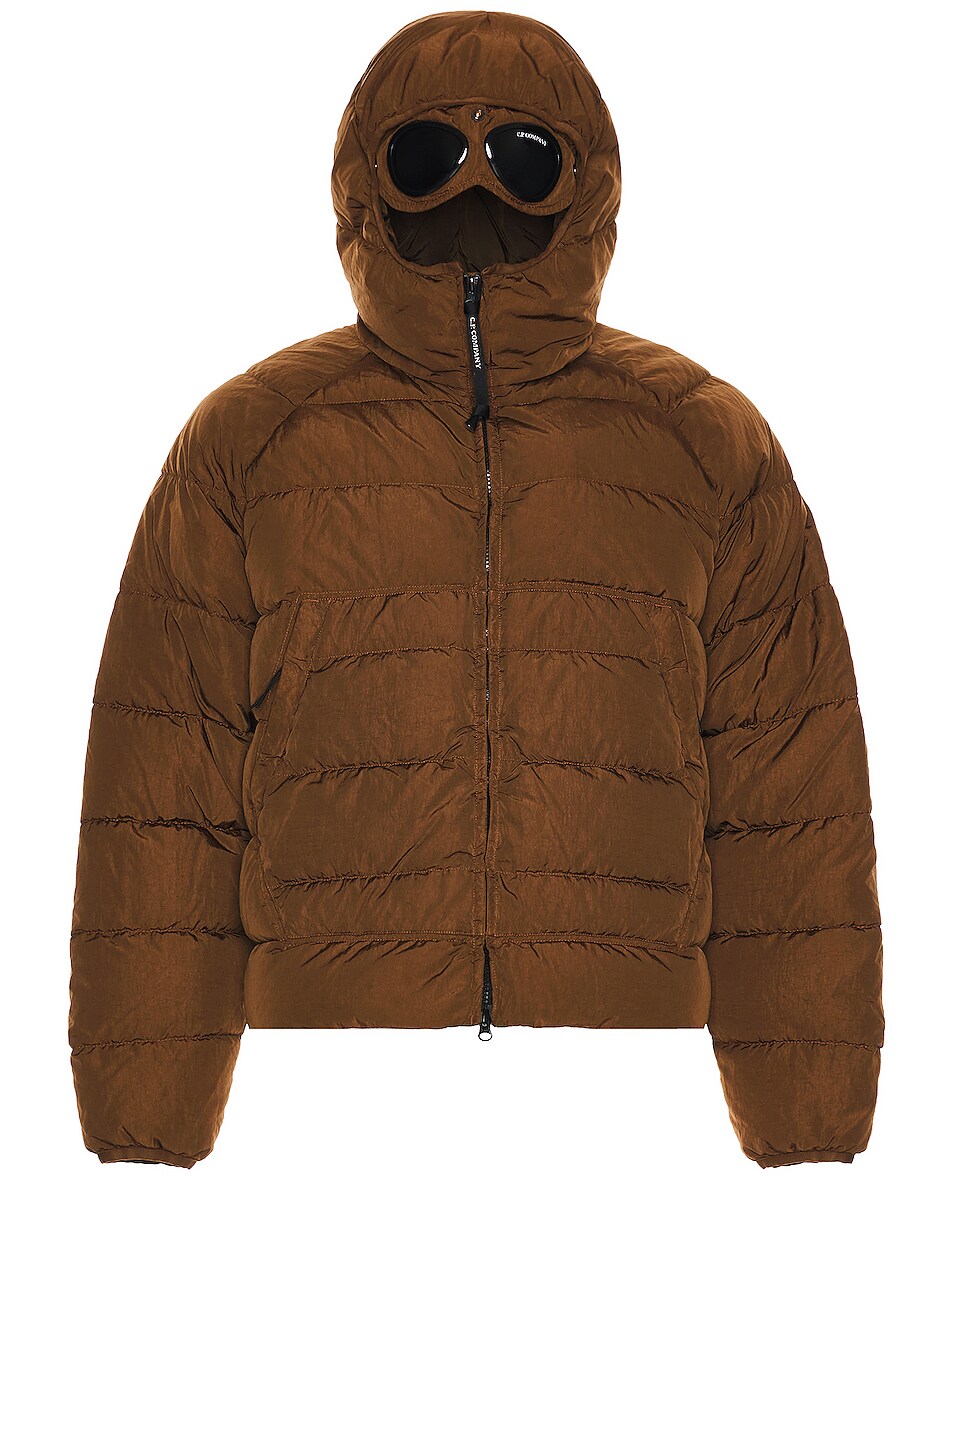 Image 1 of C.P. Company Outerwear Medium Jacket in Bronze Brown